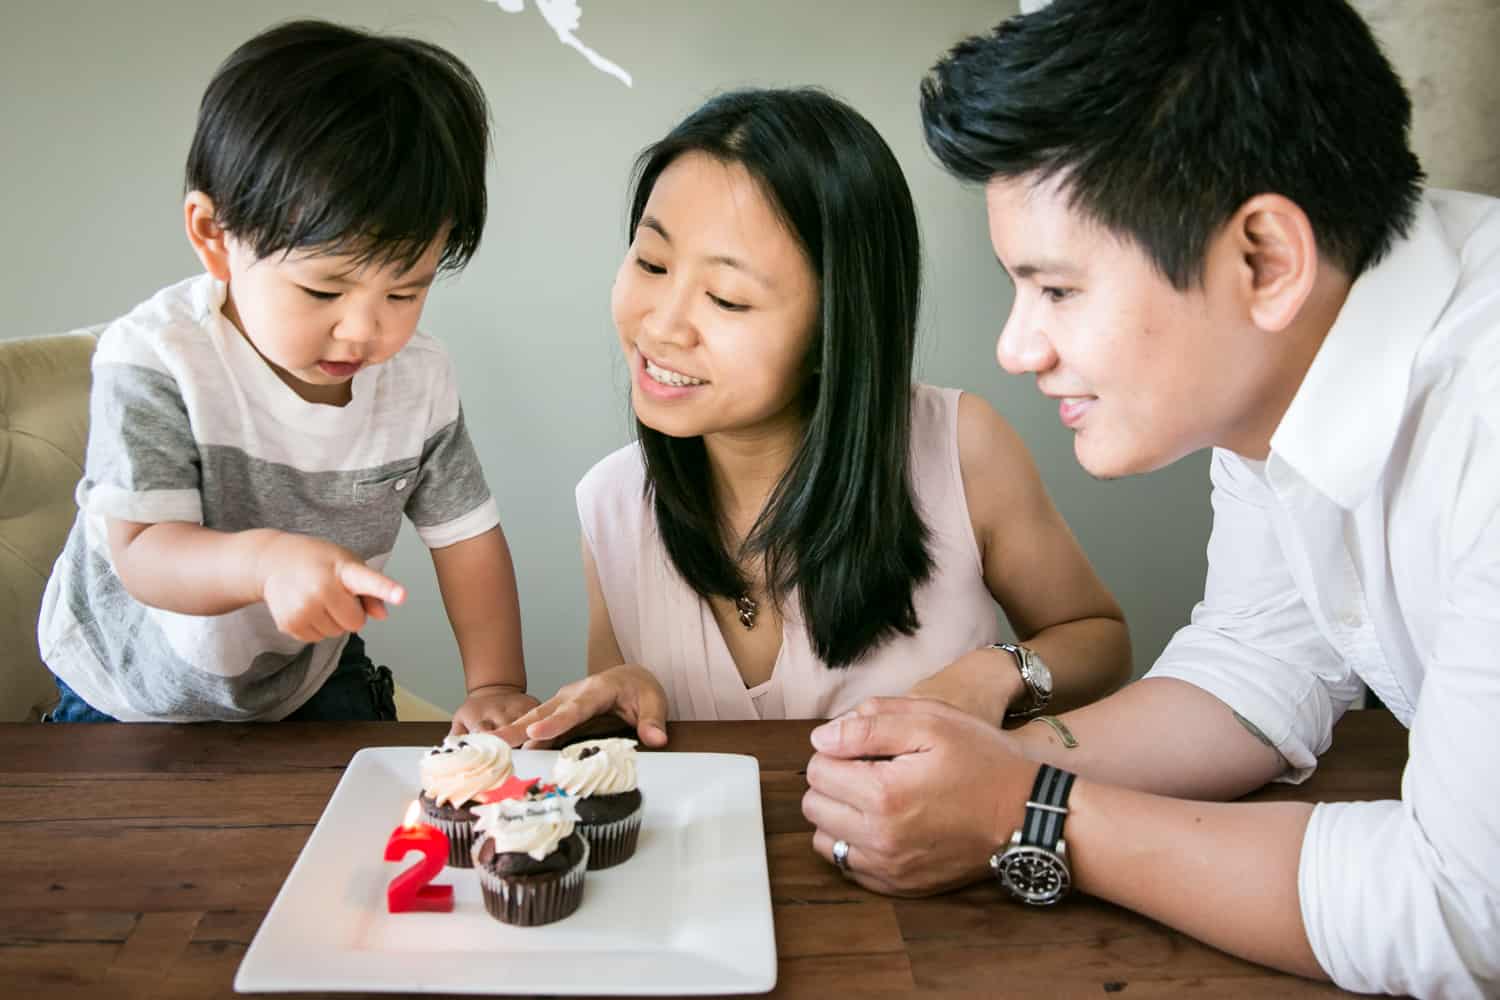 Manhattan family portrait of parents and child eating cupcakes